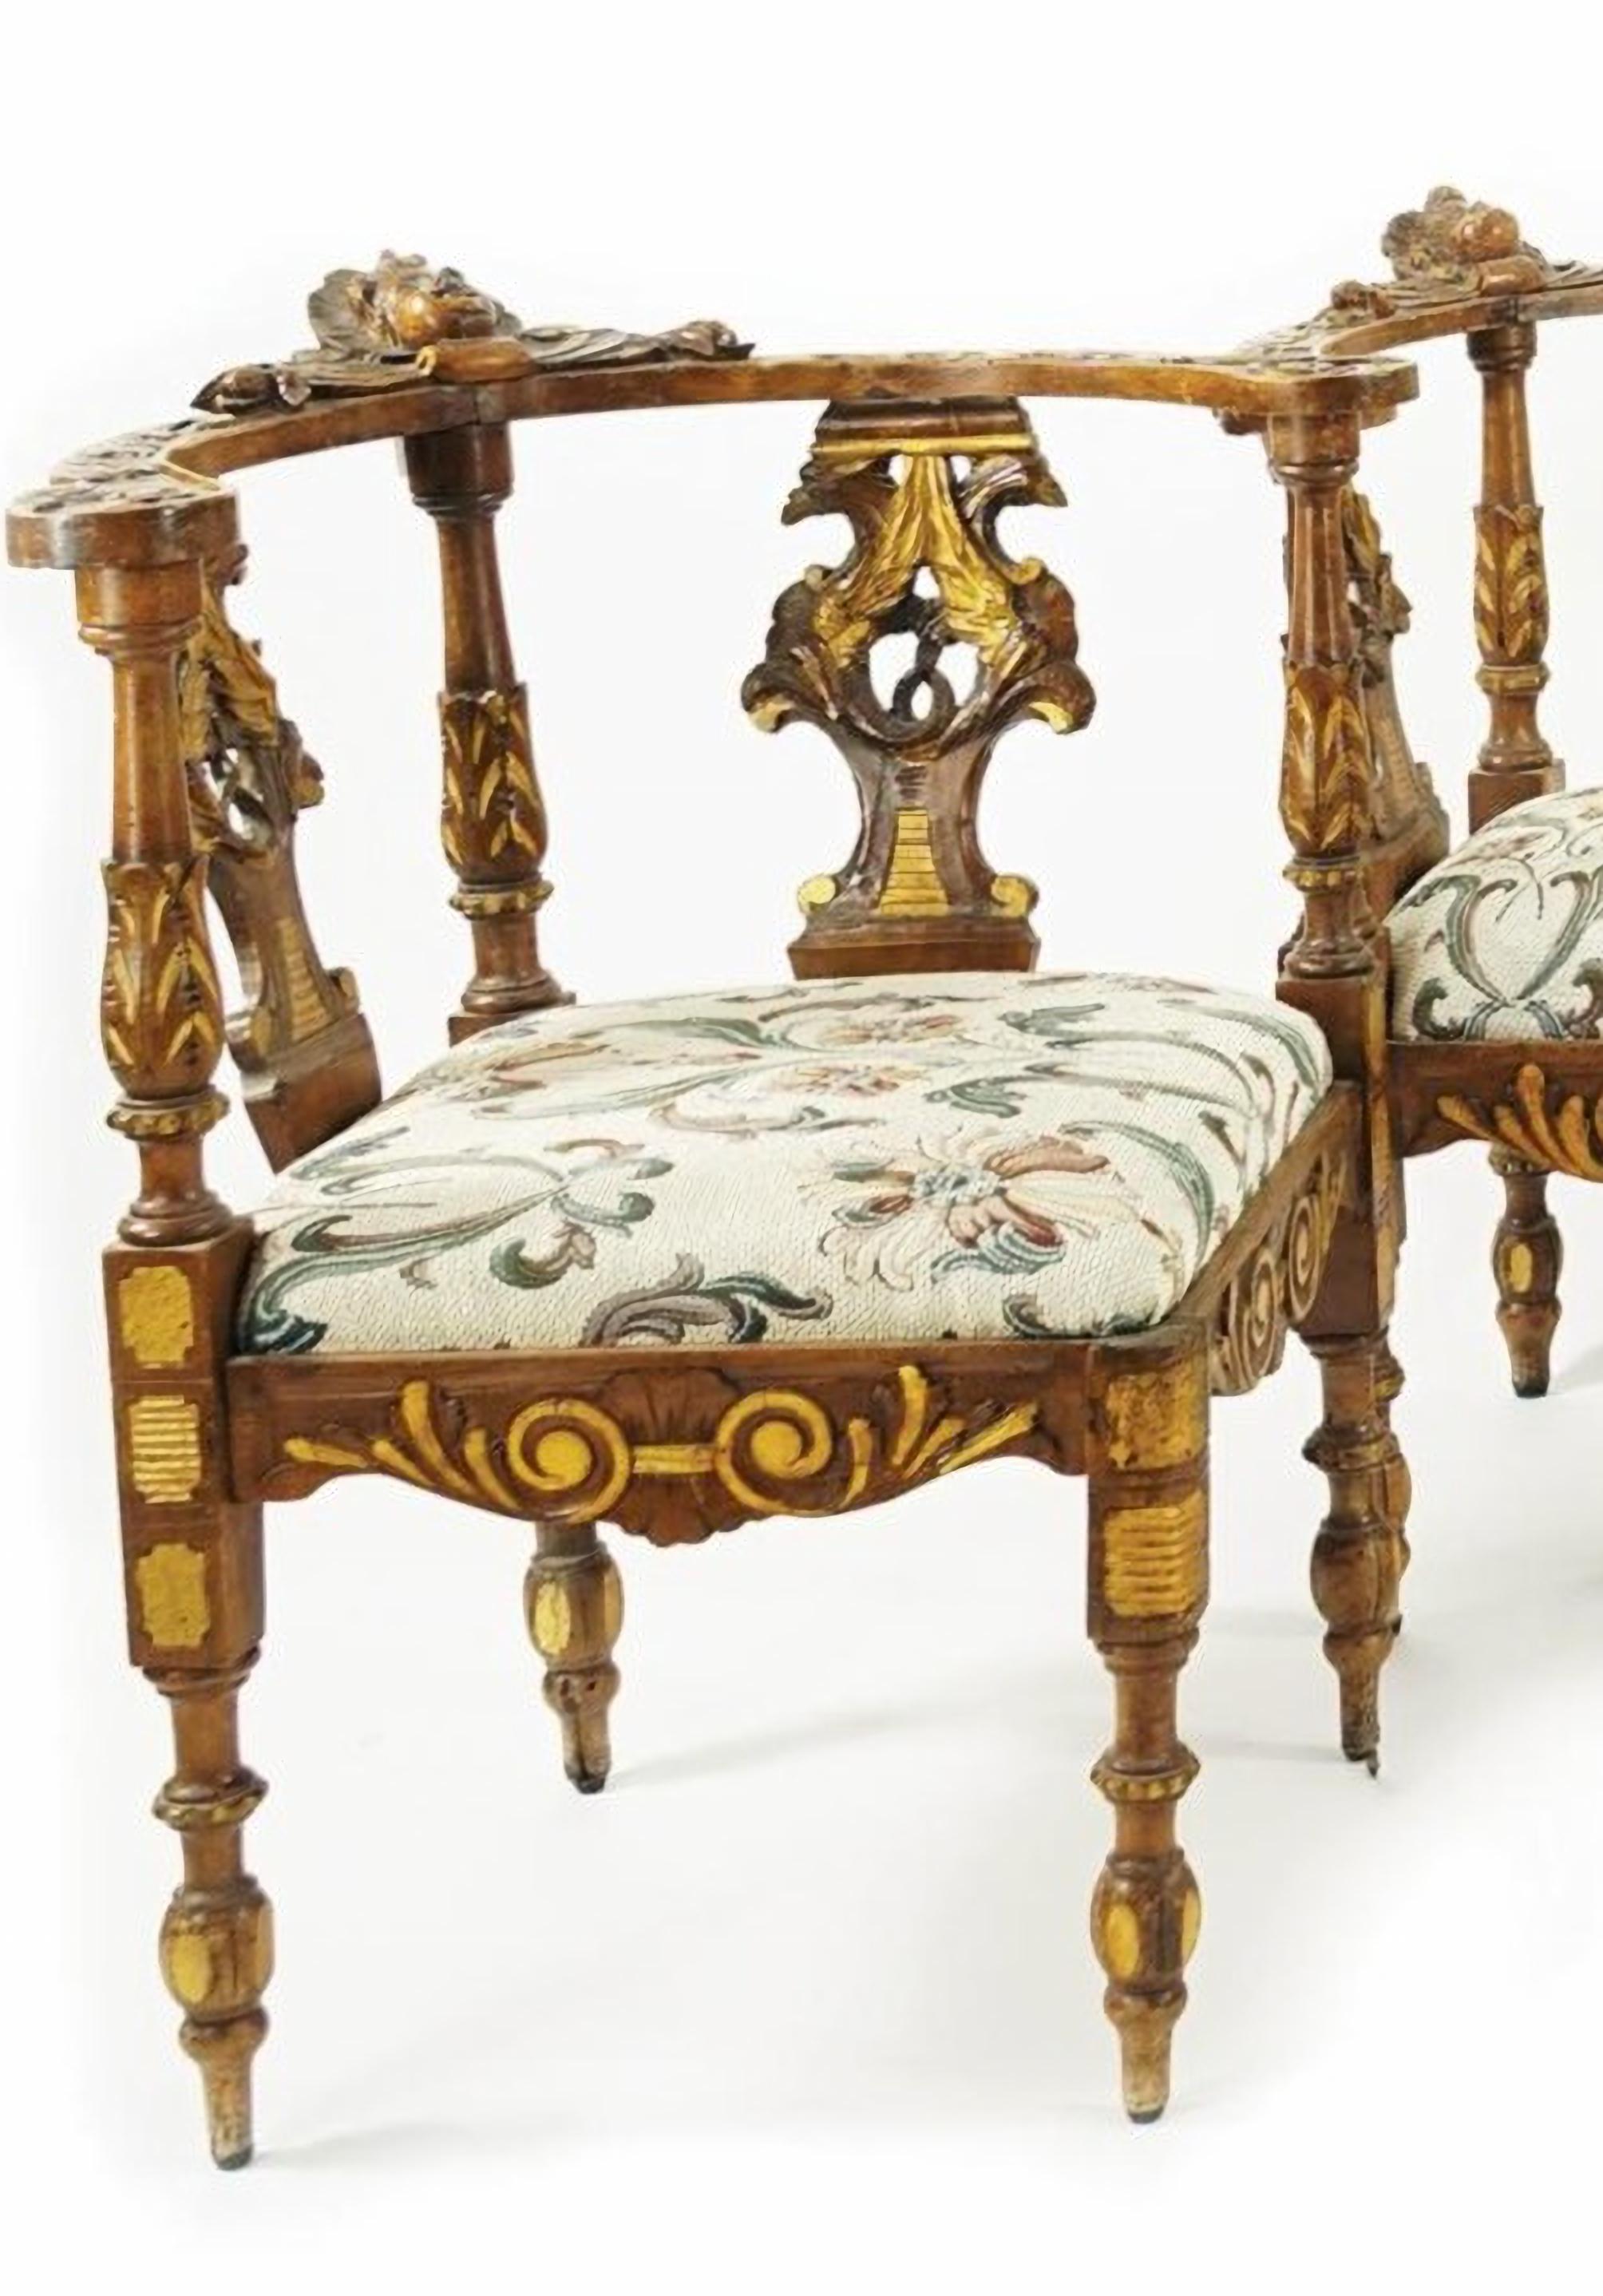 Hand-Crafted Amazing French Canape, Armchairs and Chairs 19th Century